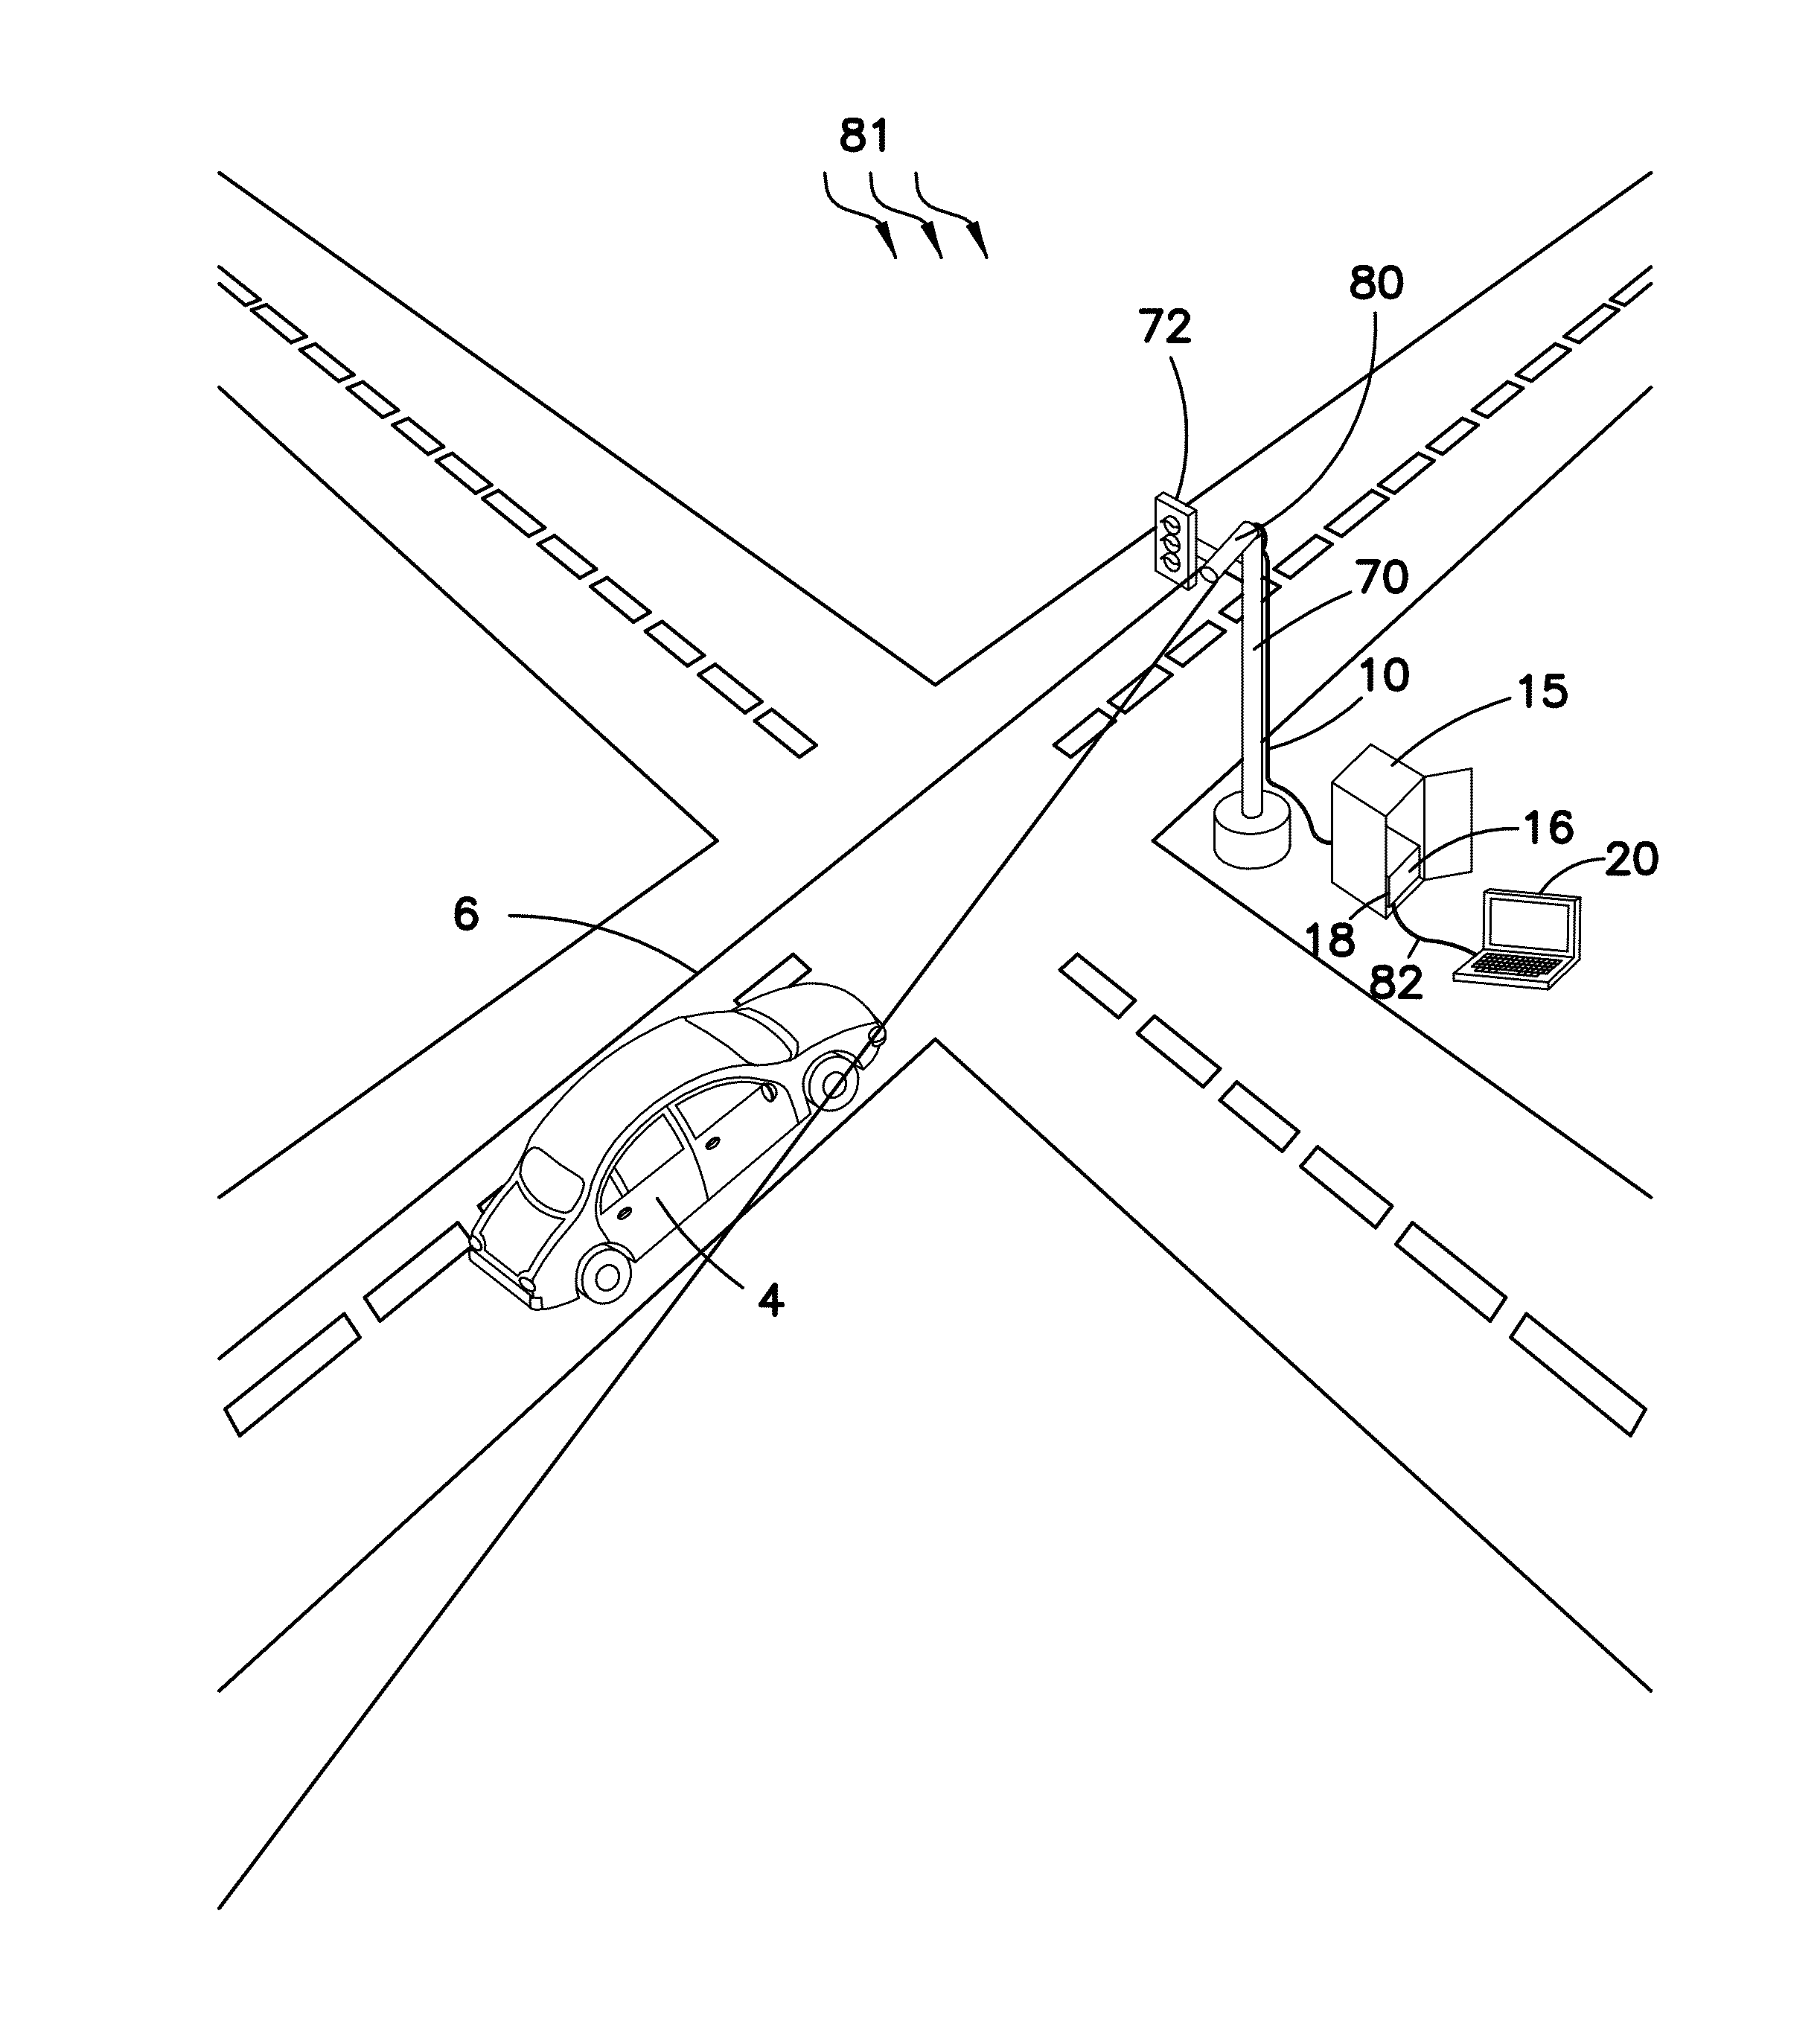 System and Method for Configuring a Traffic Control Sensor System